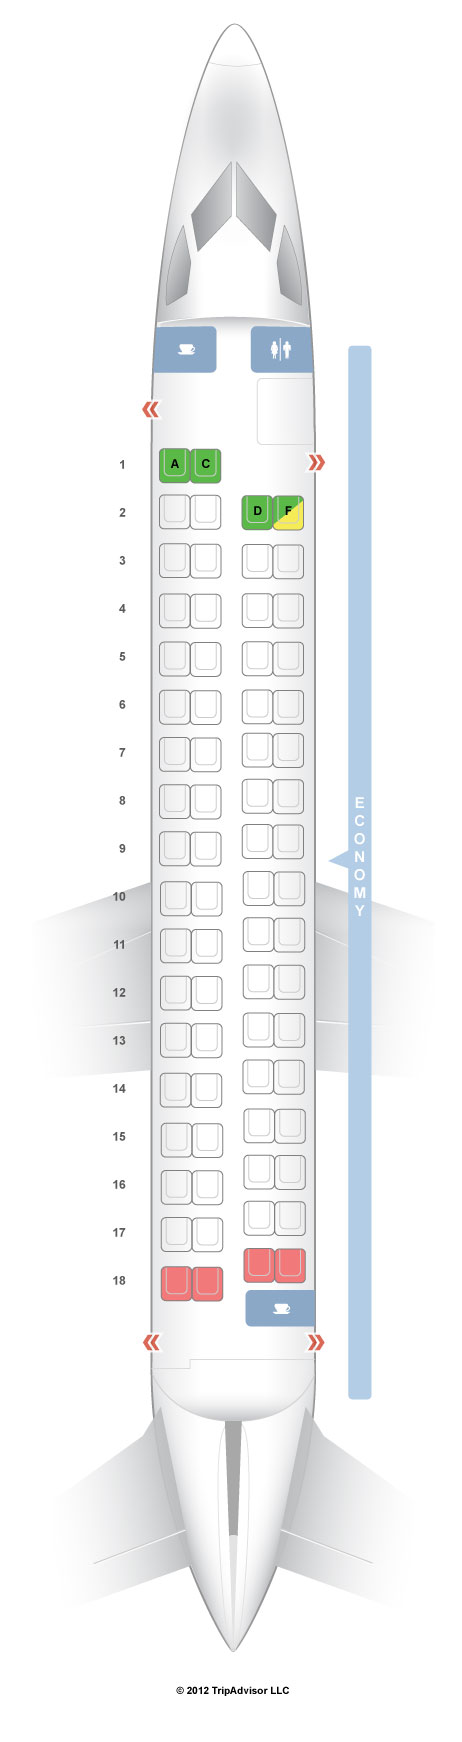 air canada seat selection tool